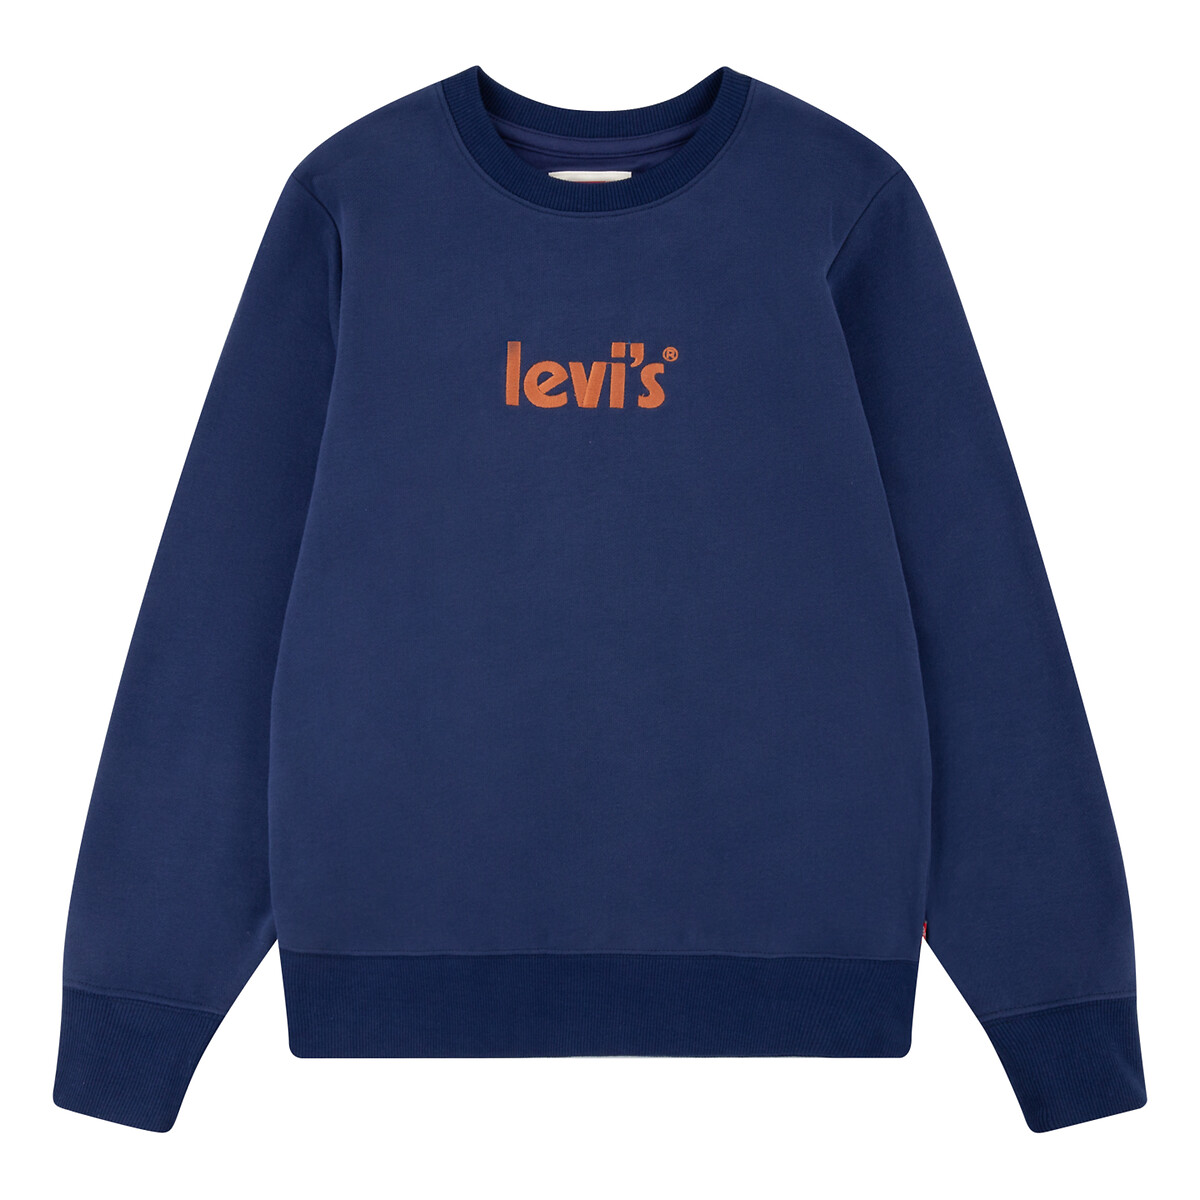 Embroidered Logo Sweatshirt in Cotton Mix with Crew Neck